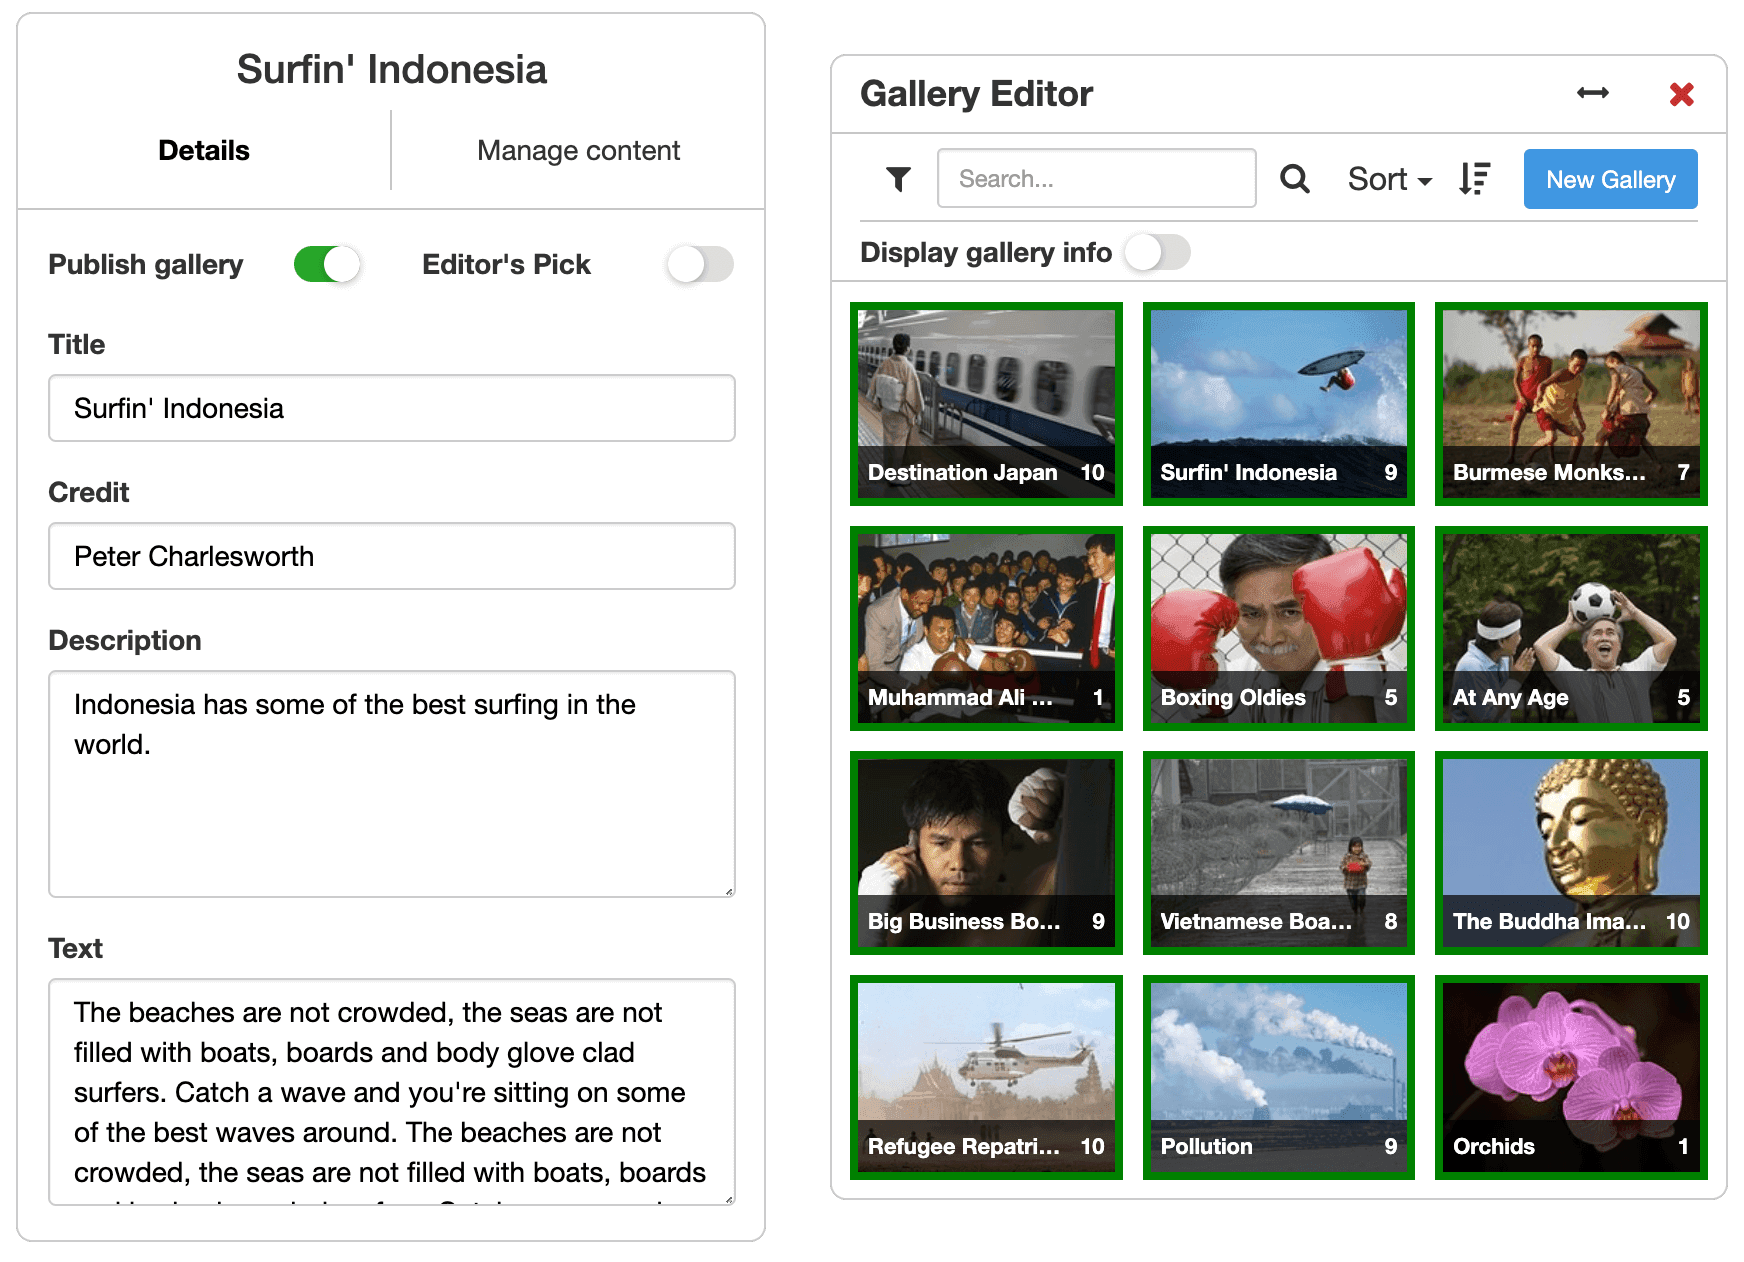 Group your photos with galleries to showcase them.